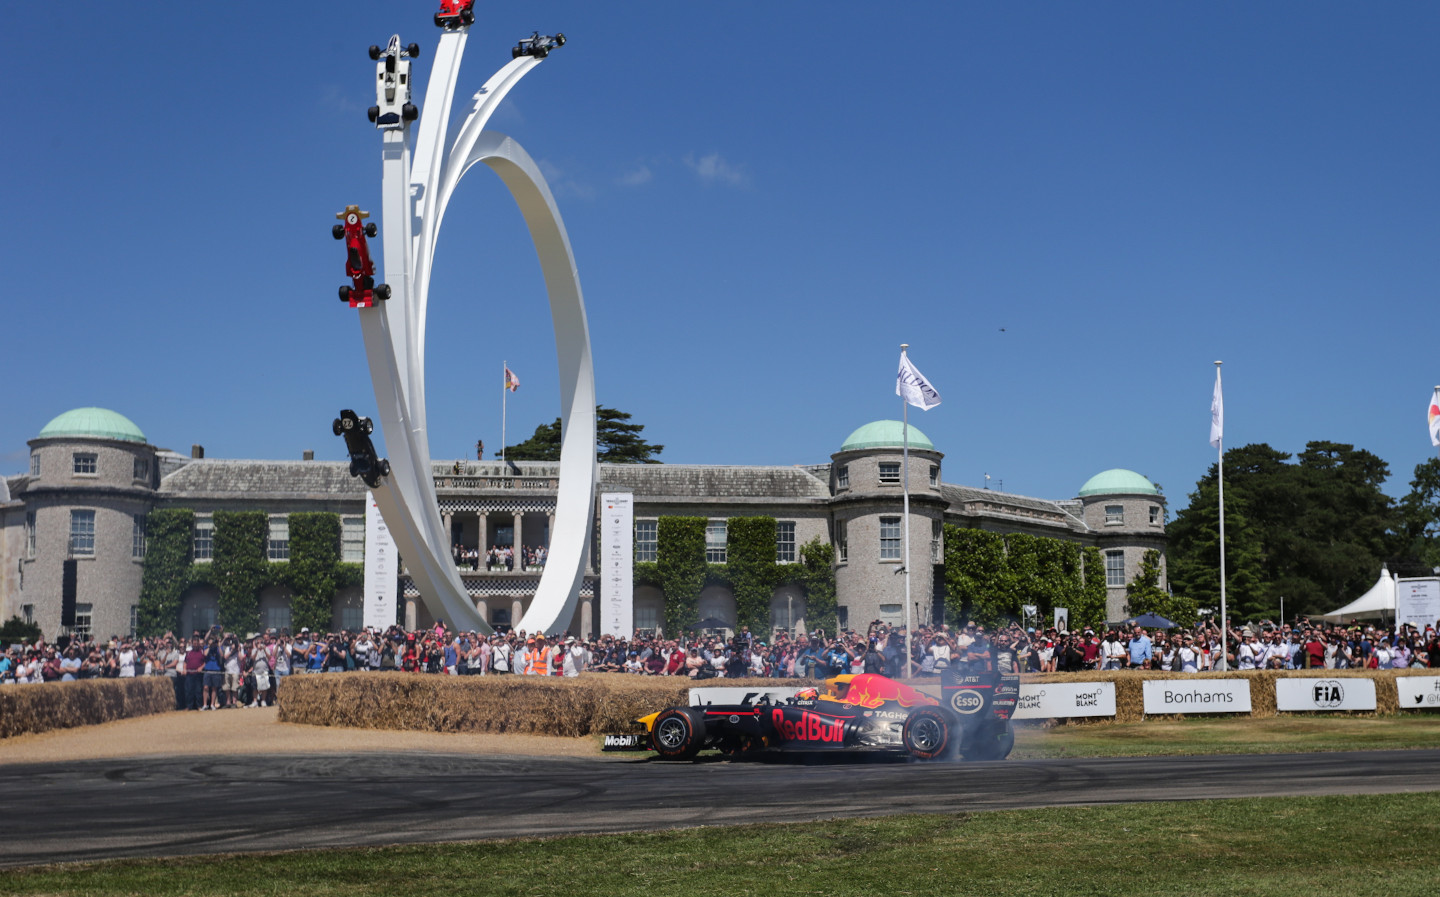 2020 Goodwood Festival of Speed postponed due to Covid-19